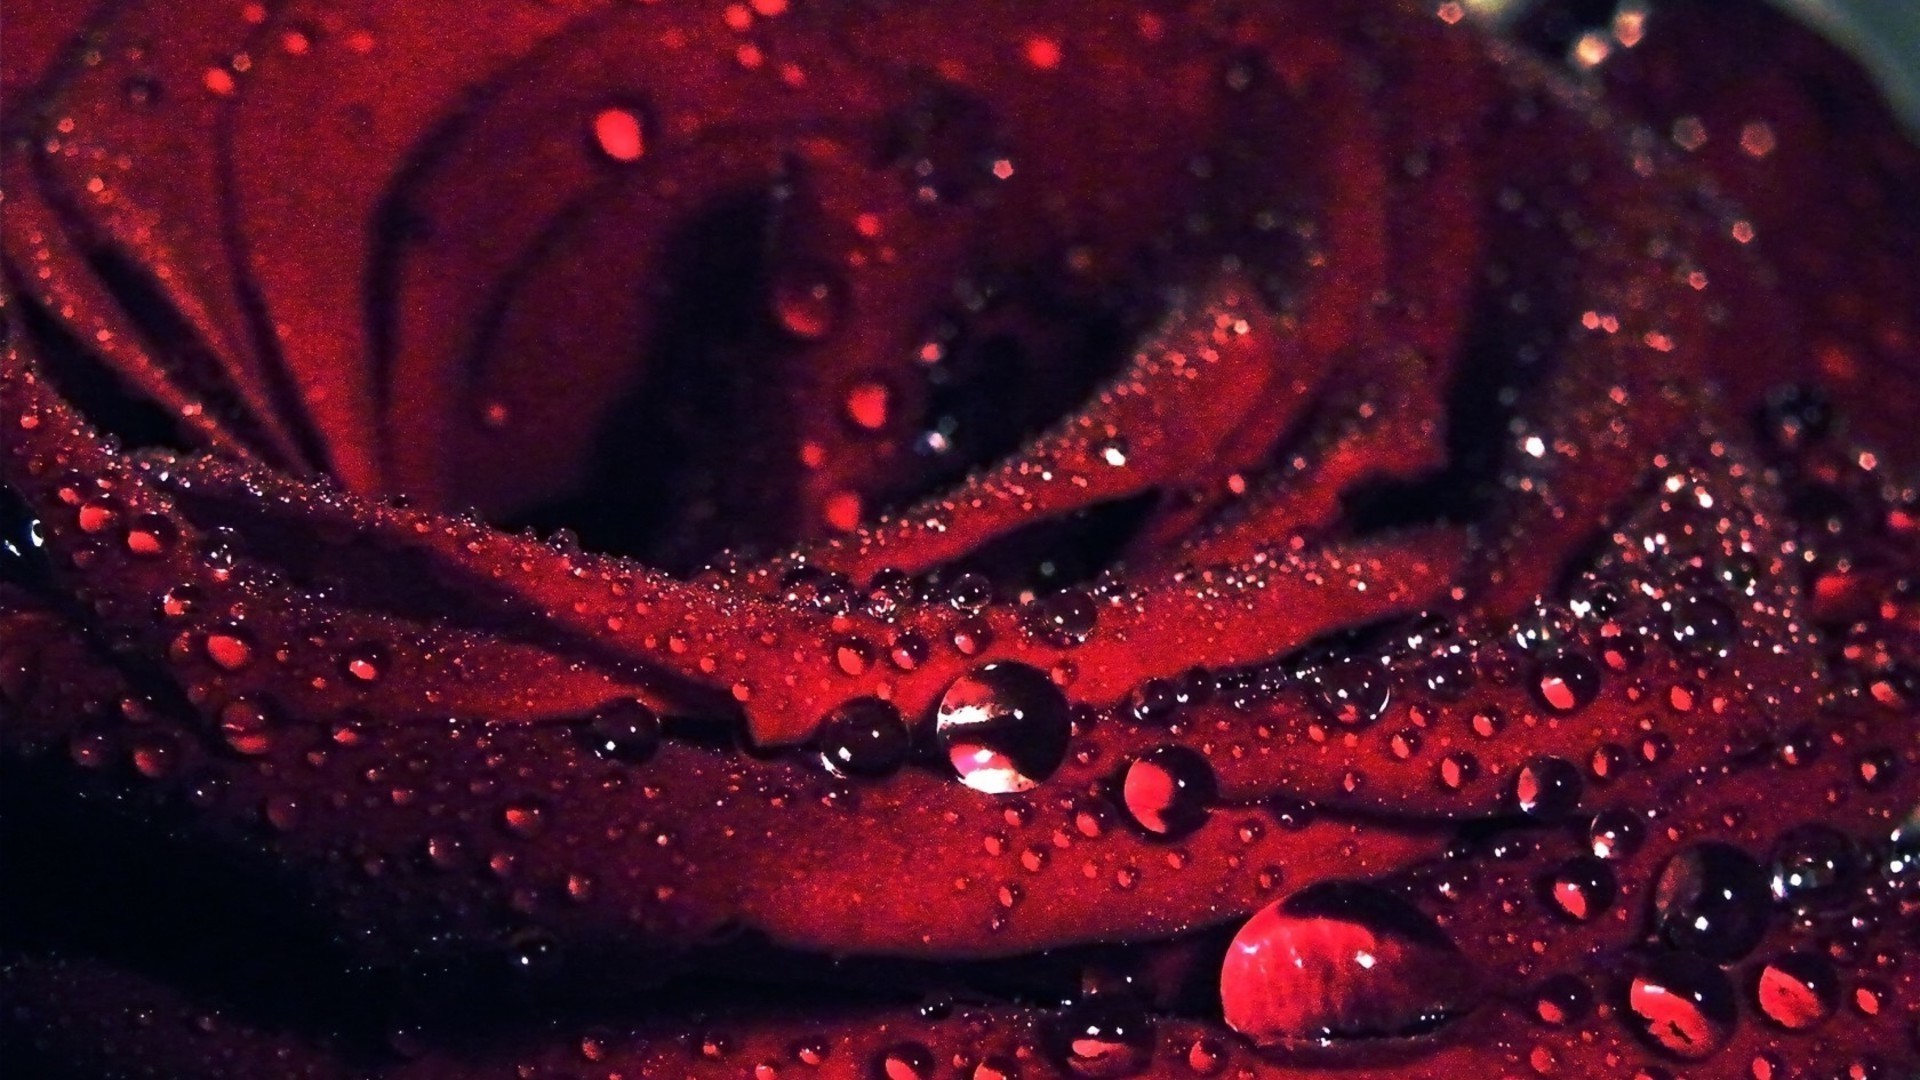 1920x1080 Red Rose Water Drops Macro HD Wide Wallpaper for Widescreen (27 Wallpapers)